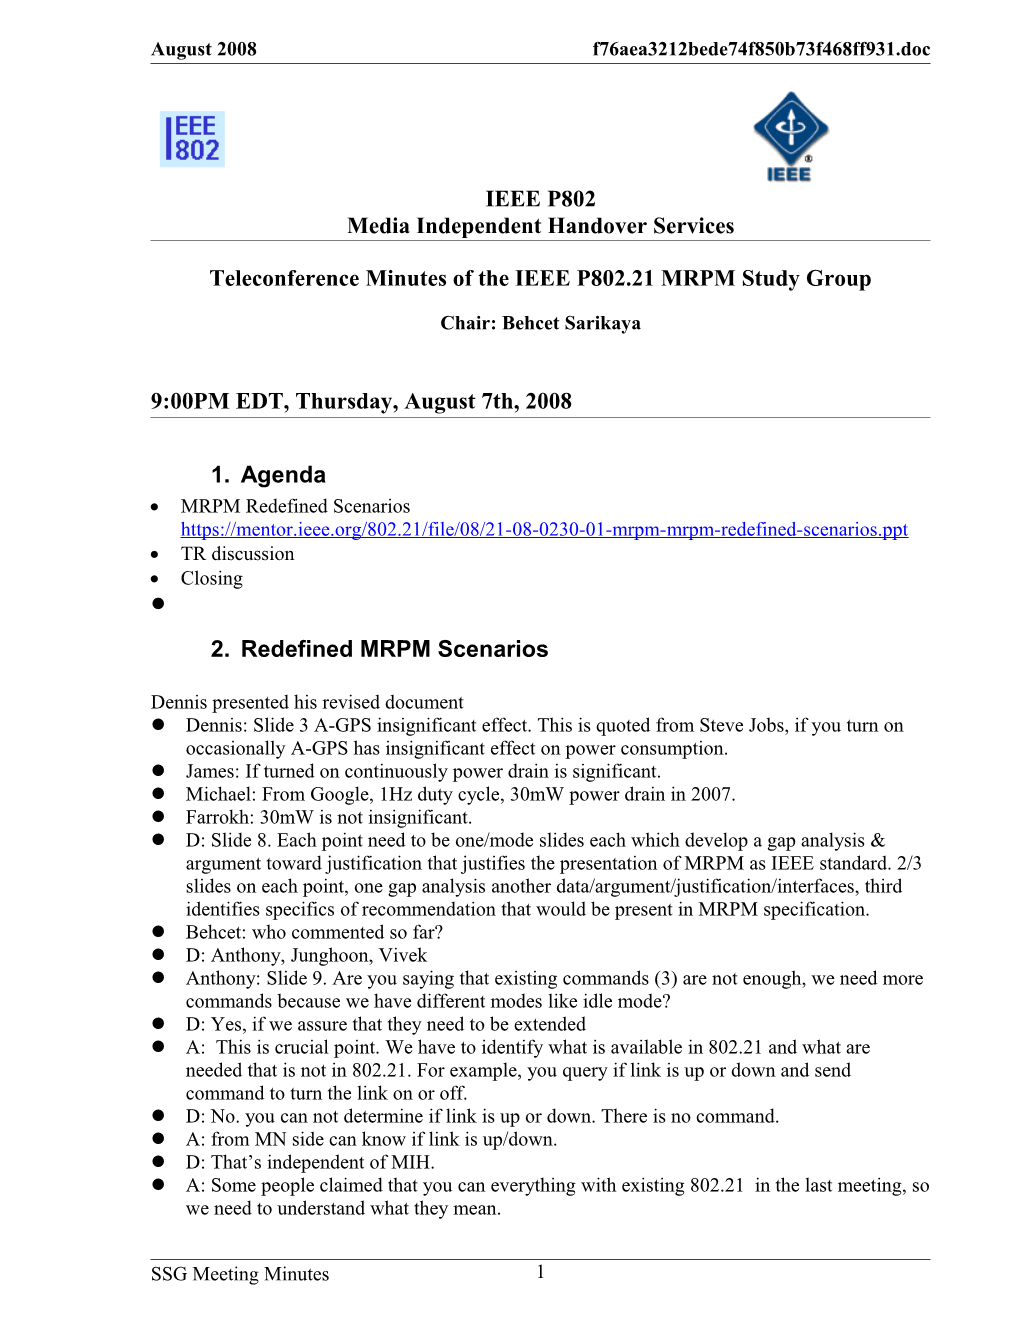 Teleconference Minutes of the IEEE P802.21 MRPM Study Group s1